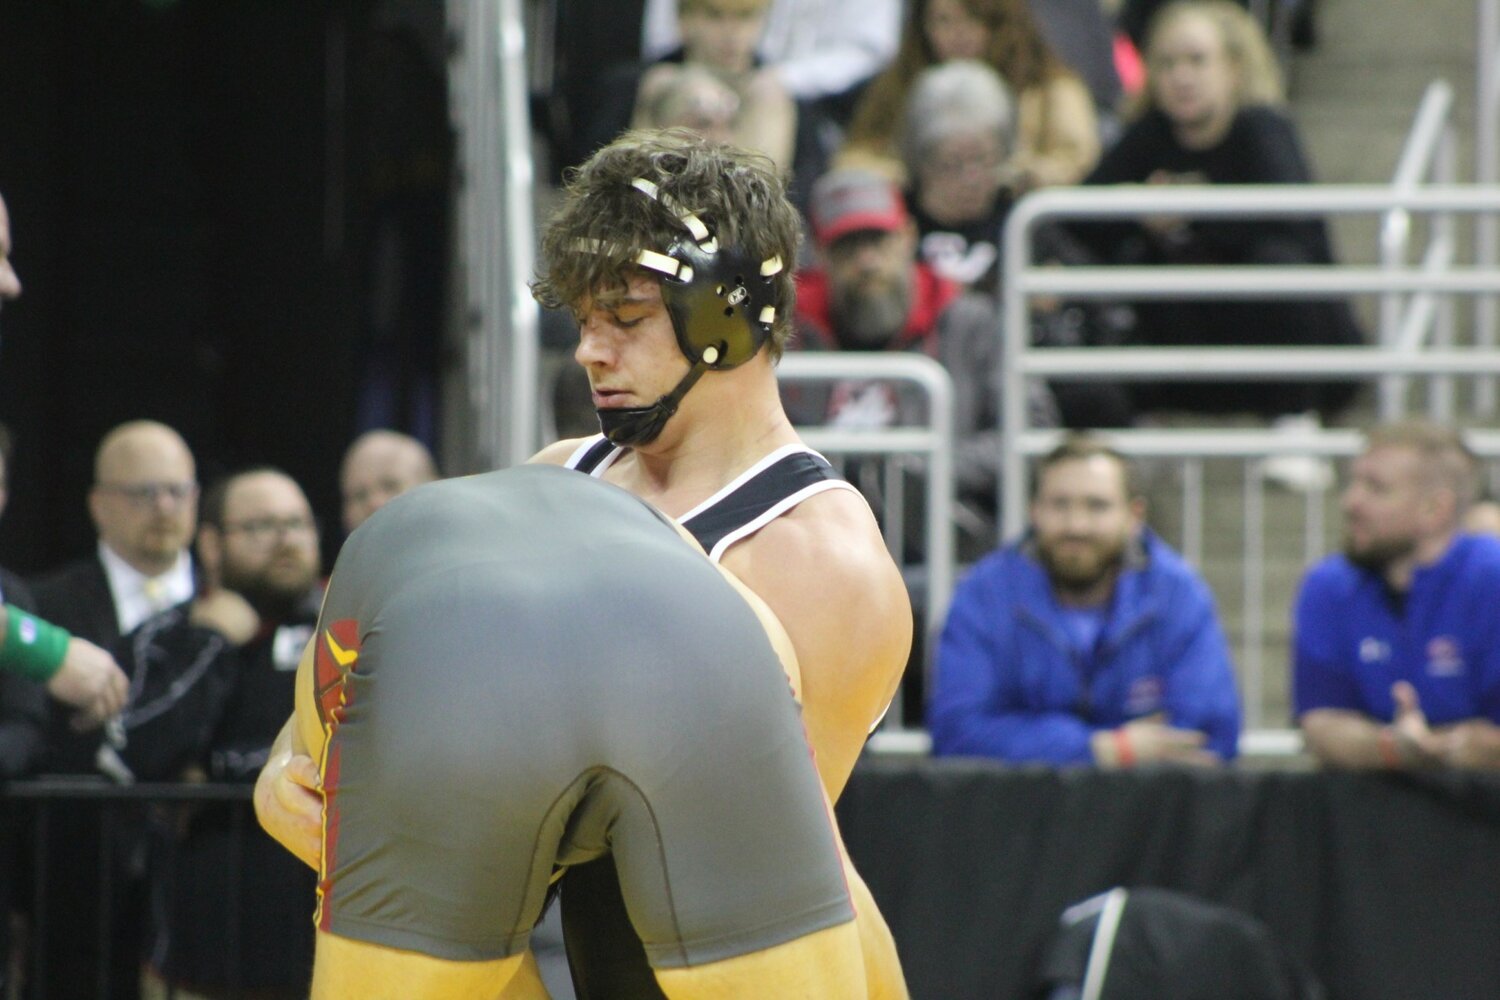 Woodall controlled the match from the beginning on his way to the win.